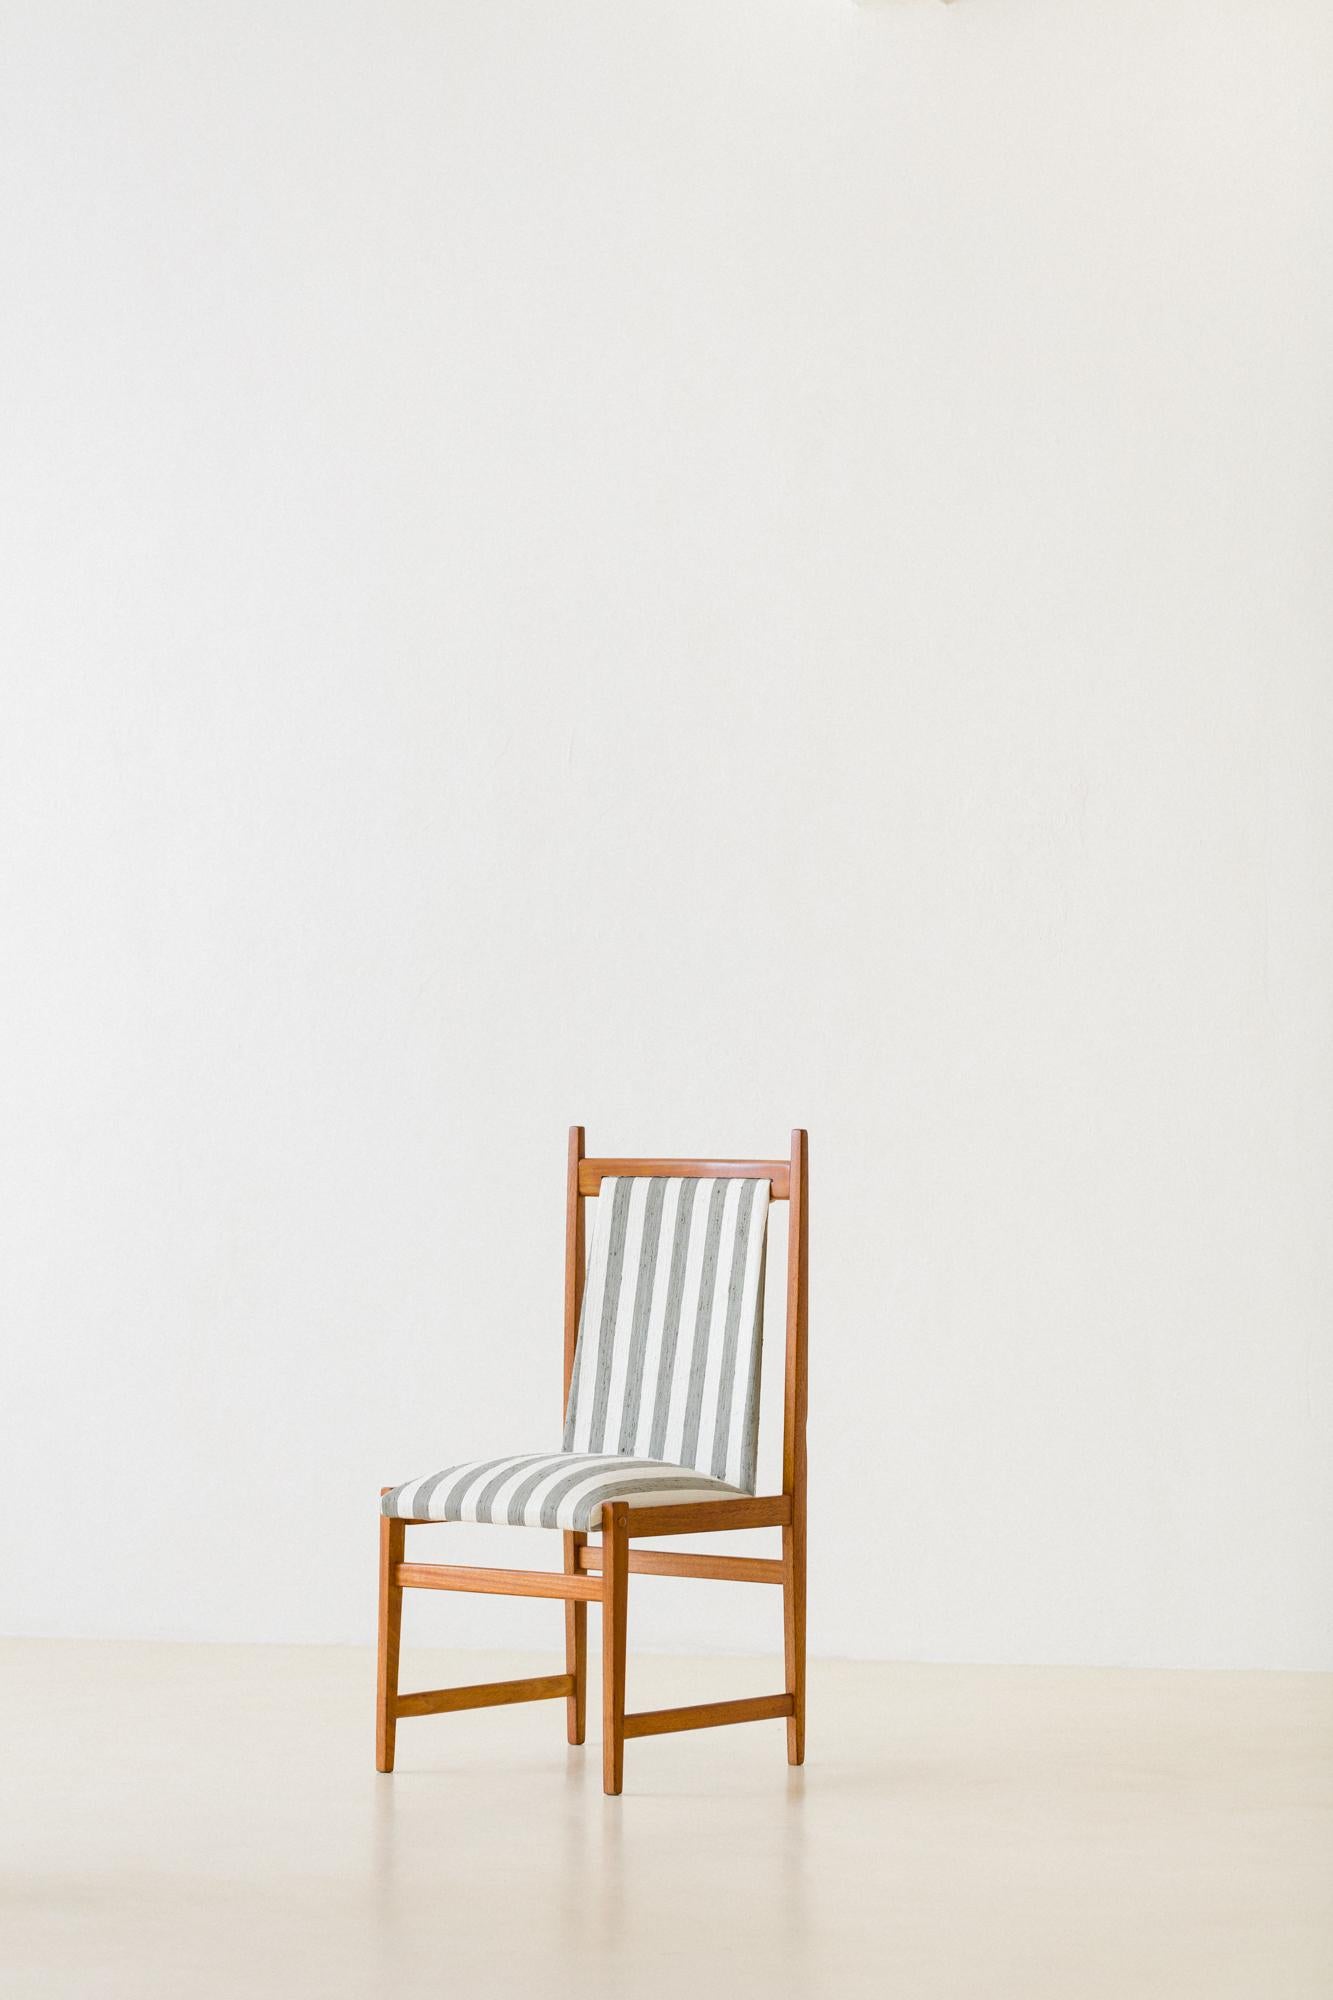 Set of Six Dining Chairs, by Celina Decorações, 1960s, Brazilian Midcentury For Sale 3